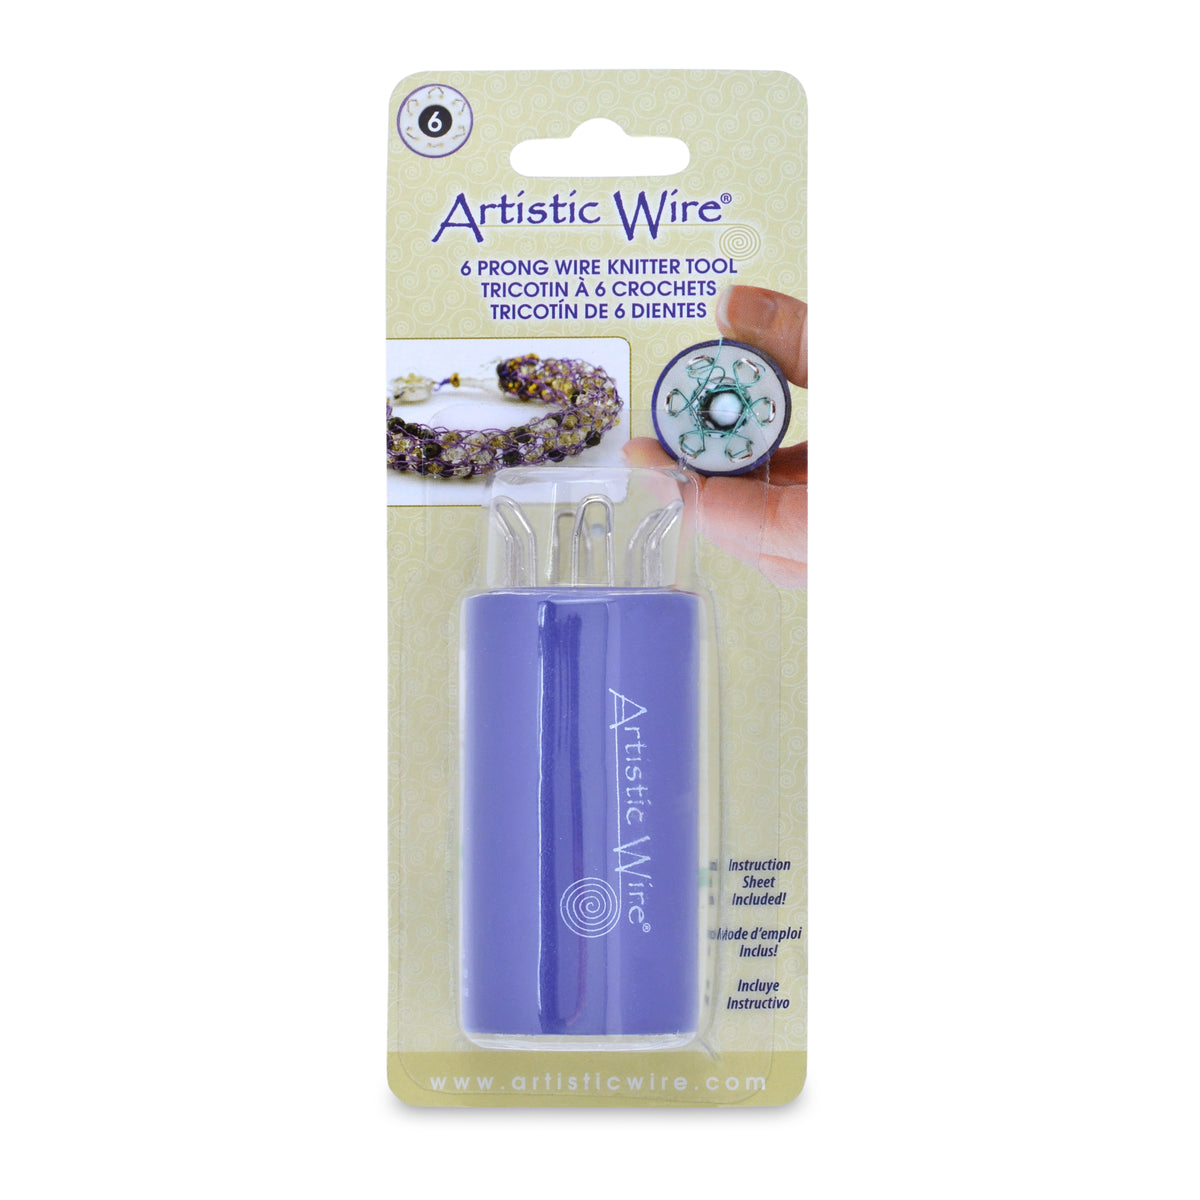 Artistic Wire Knitter Tool, 4 Prong